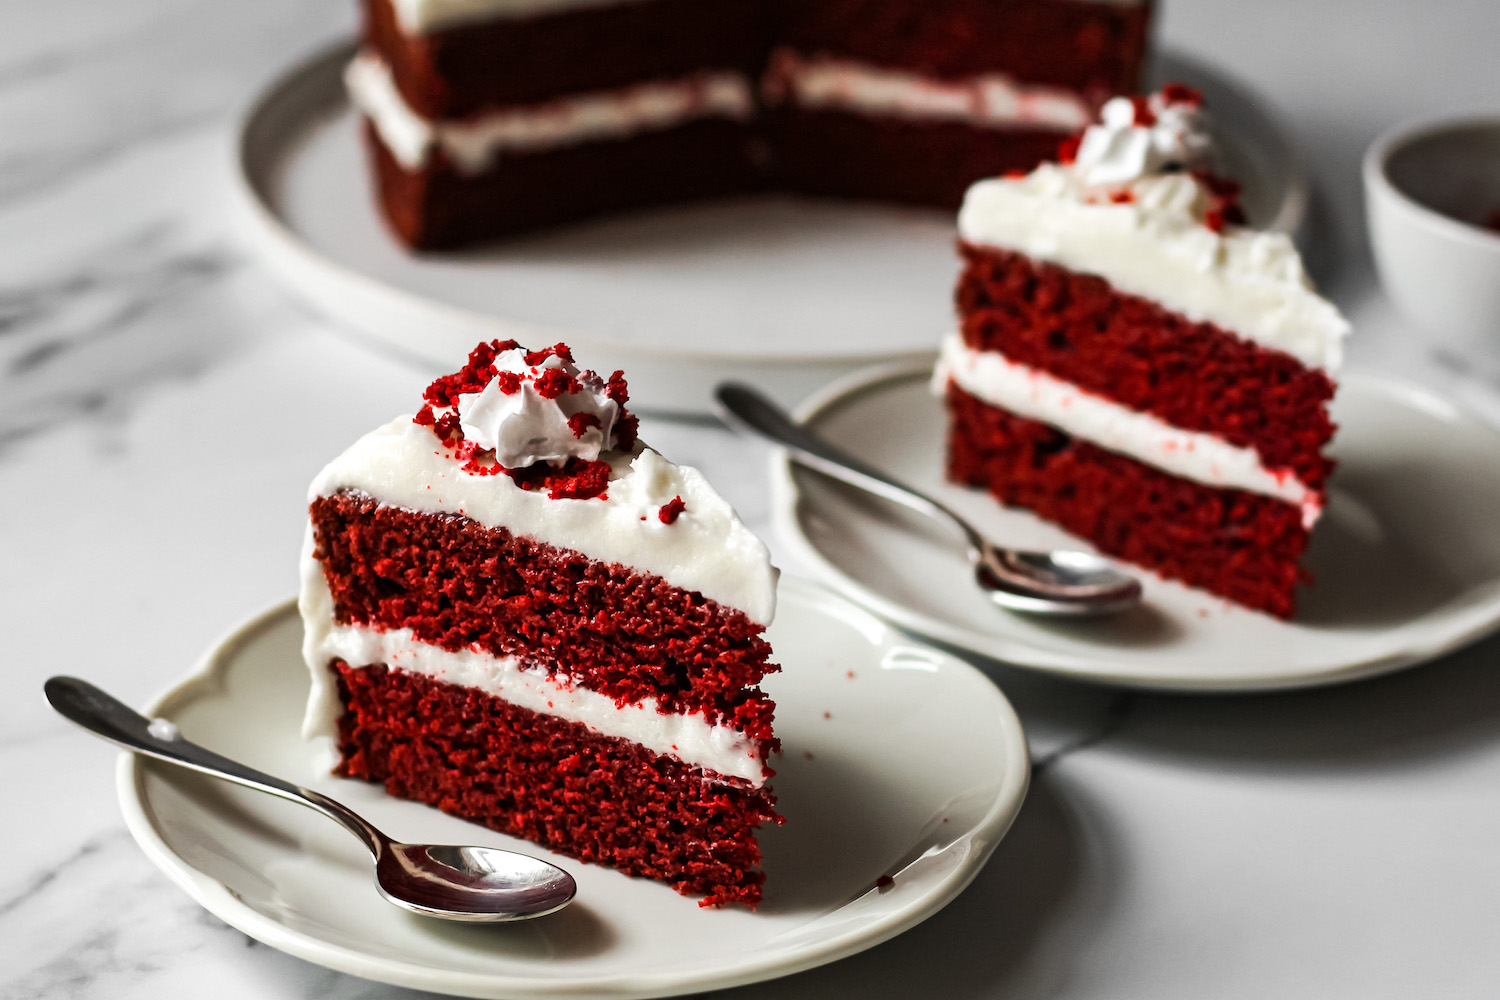 Red Velevt Cake Recipe: How to make Christmas Red Velvet Cake Recipe at  Home | Homemade Red Velvet Cake Recipe - Times Food